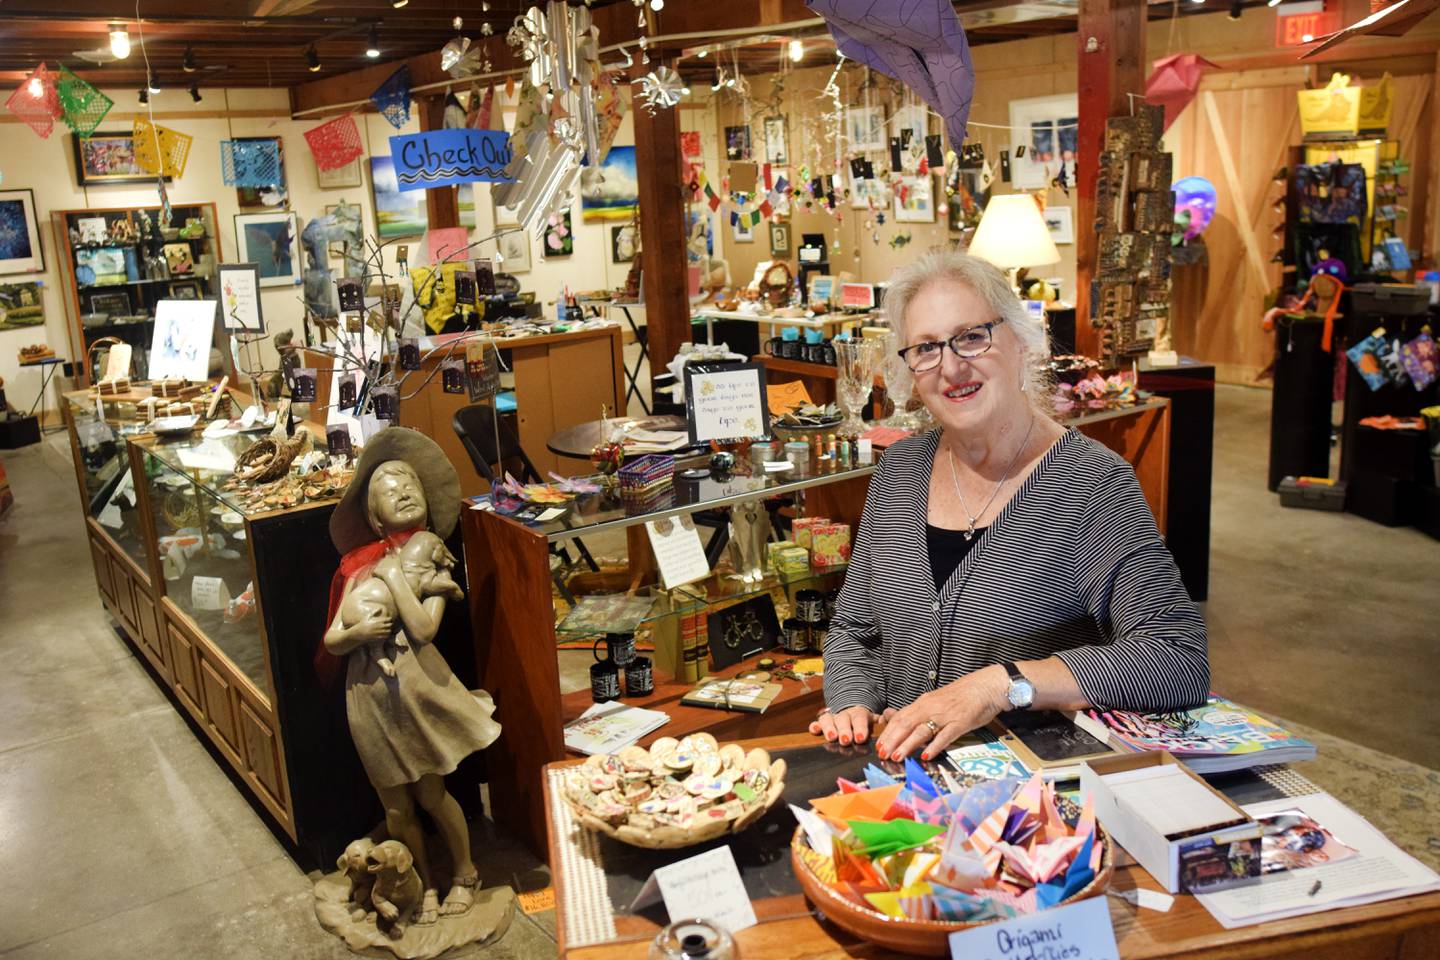 Terri Ayres, volunteer manager of the Geisler-Penquite Gift Shop at the Center for Arts & Artists, showcases the many handmade and donated items for sale at the store, the proceeds of which benefit creative-based programming and projects for youth.